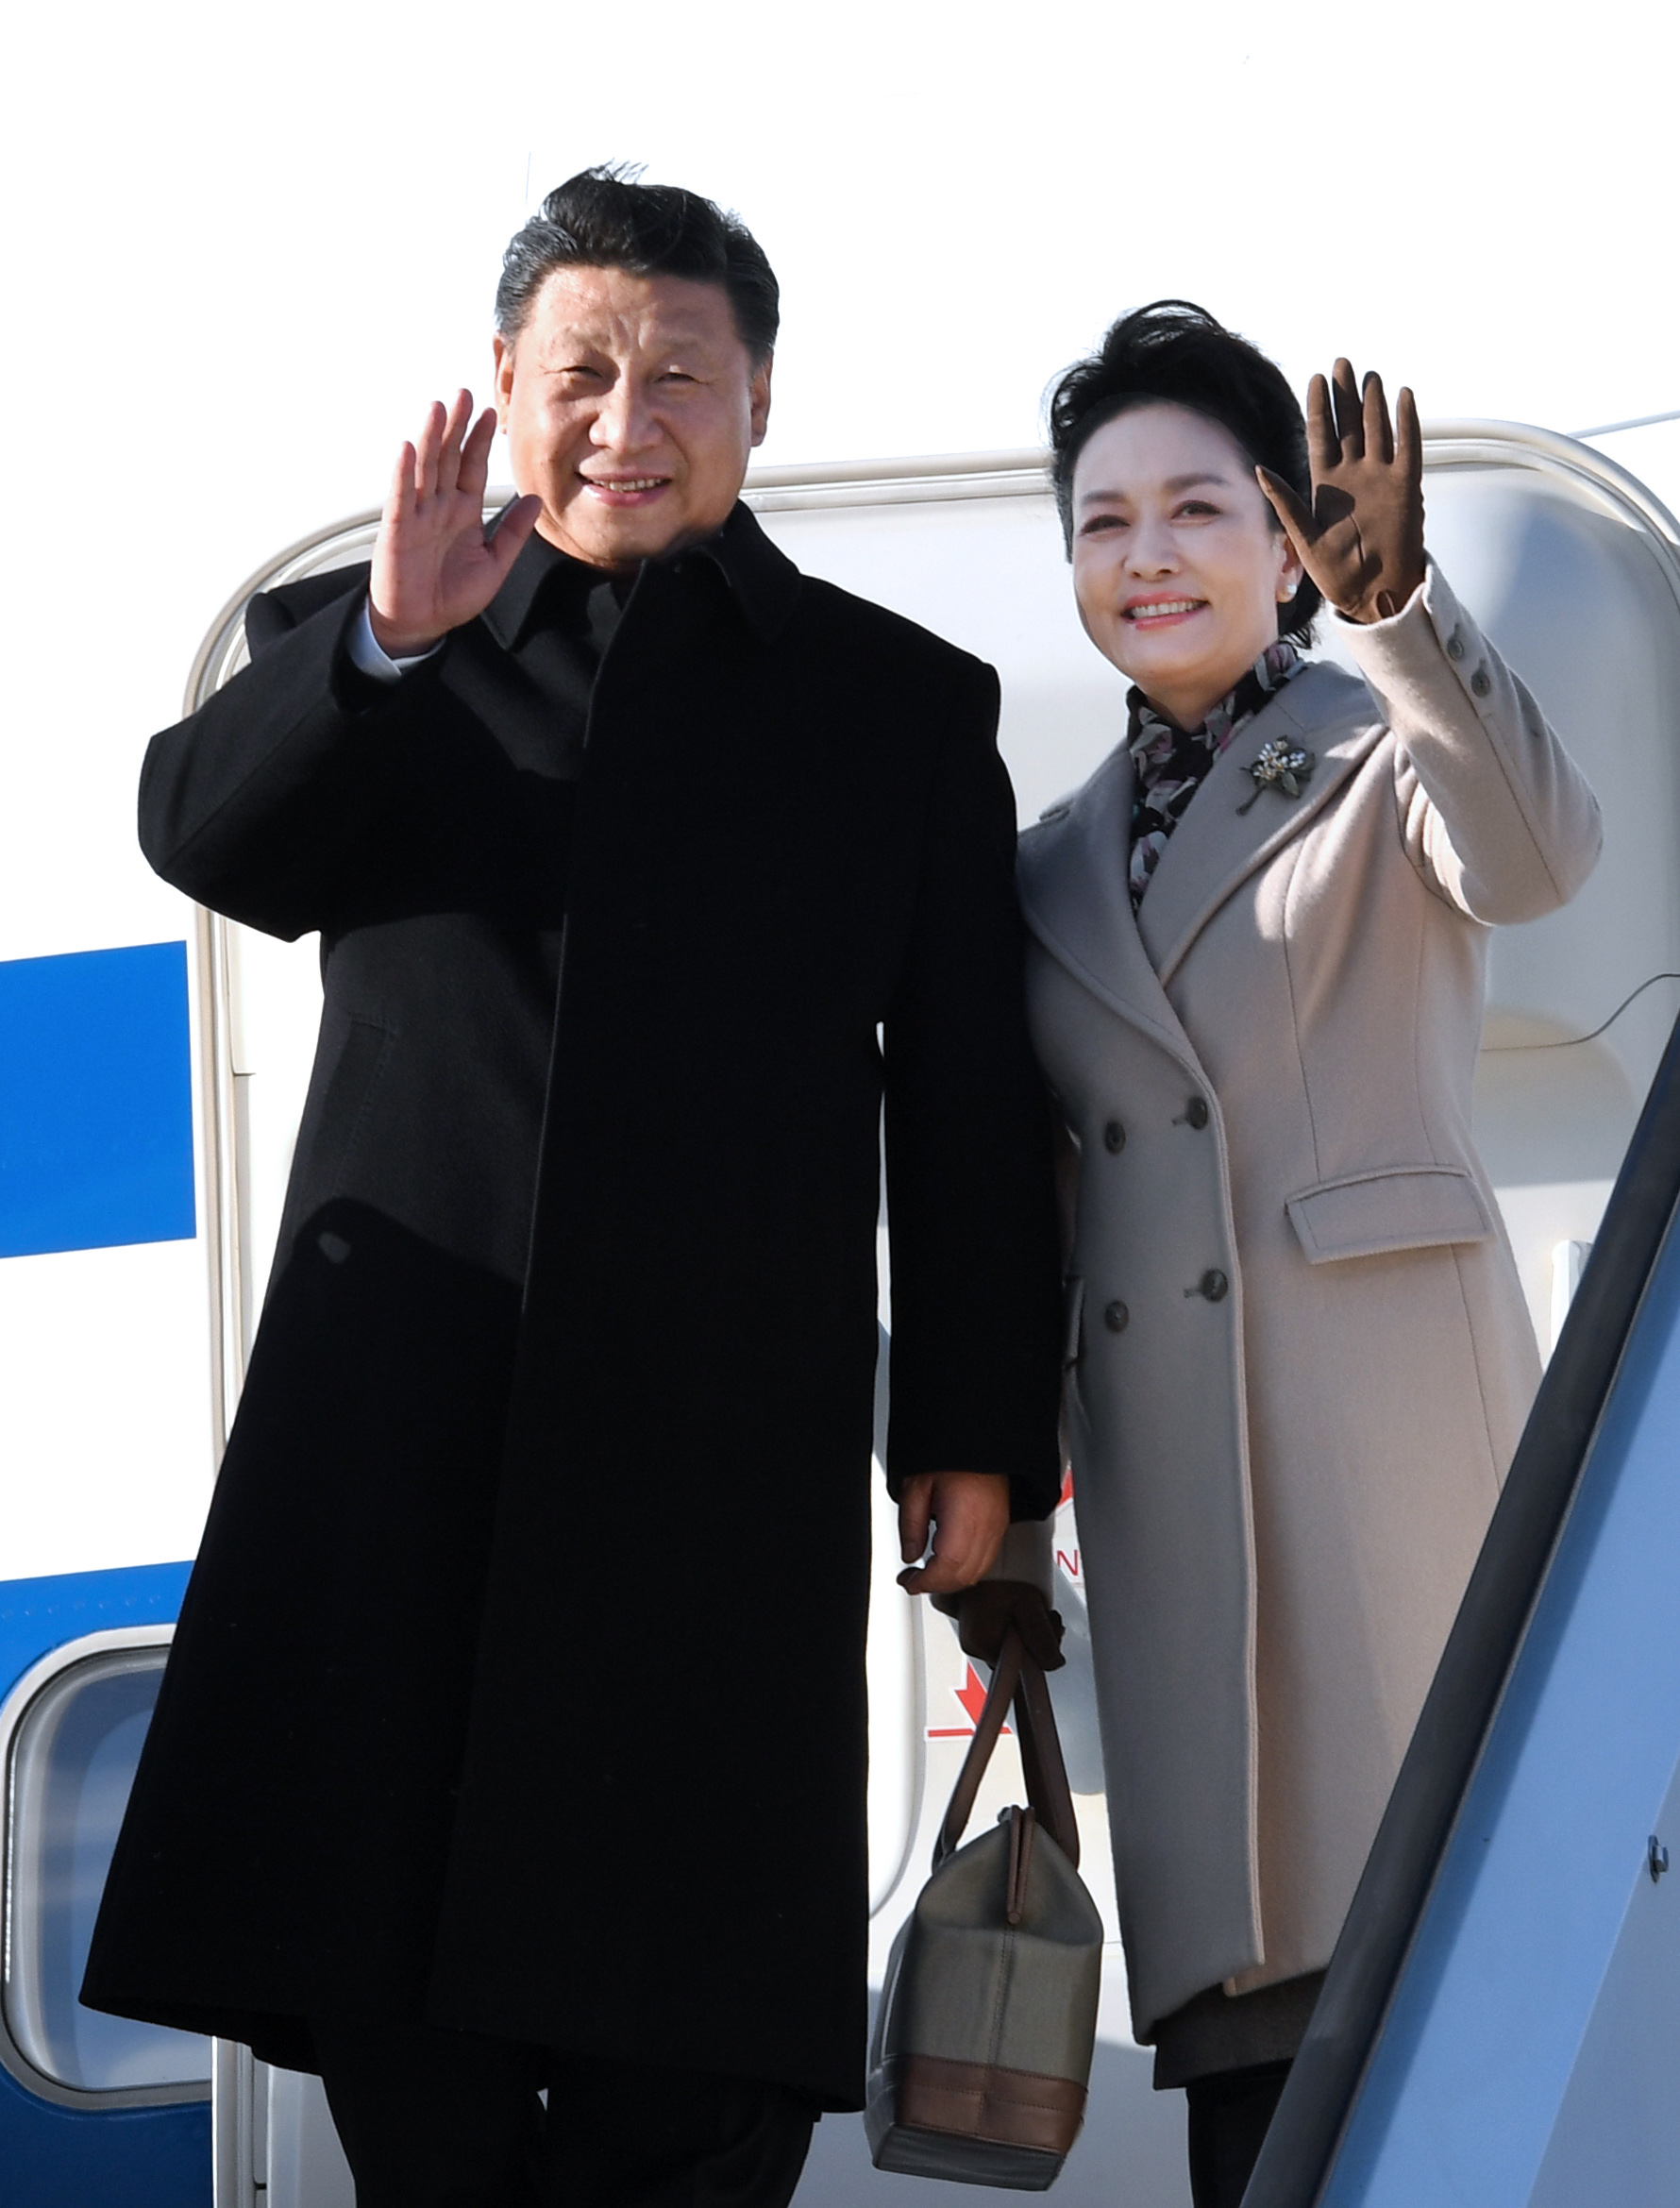 Chinese President Xi Jinping and his wife Peng Liyuan arrive in Helsinki, Finland, on April 4, 2017. Chinese President Xi Jinping is paying a state visit to Finland. [Photo: Xinhua/Rao Aimin]